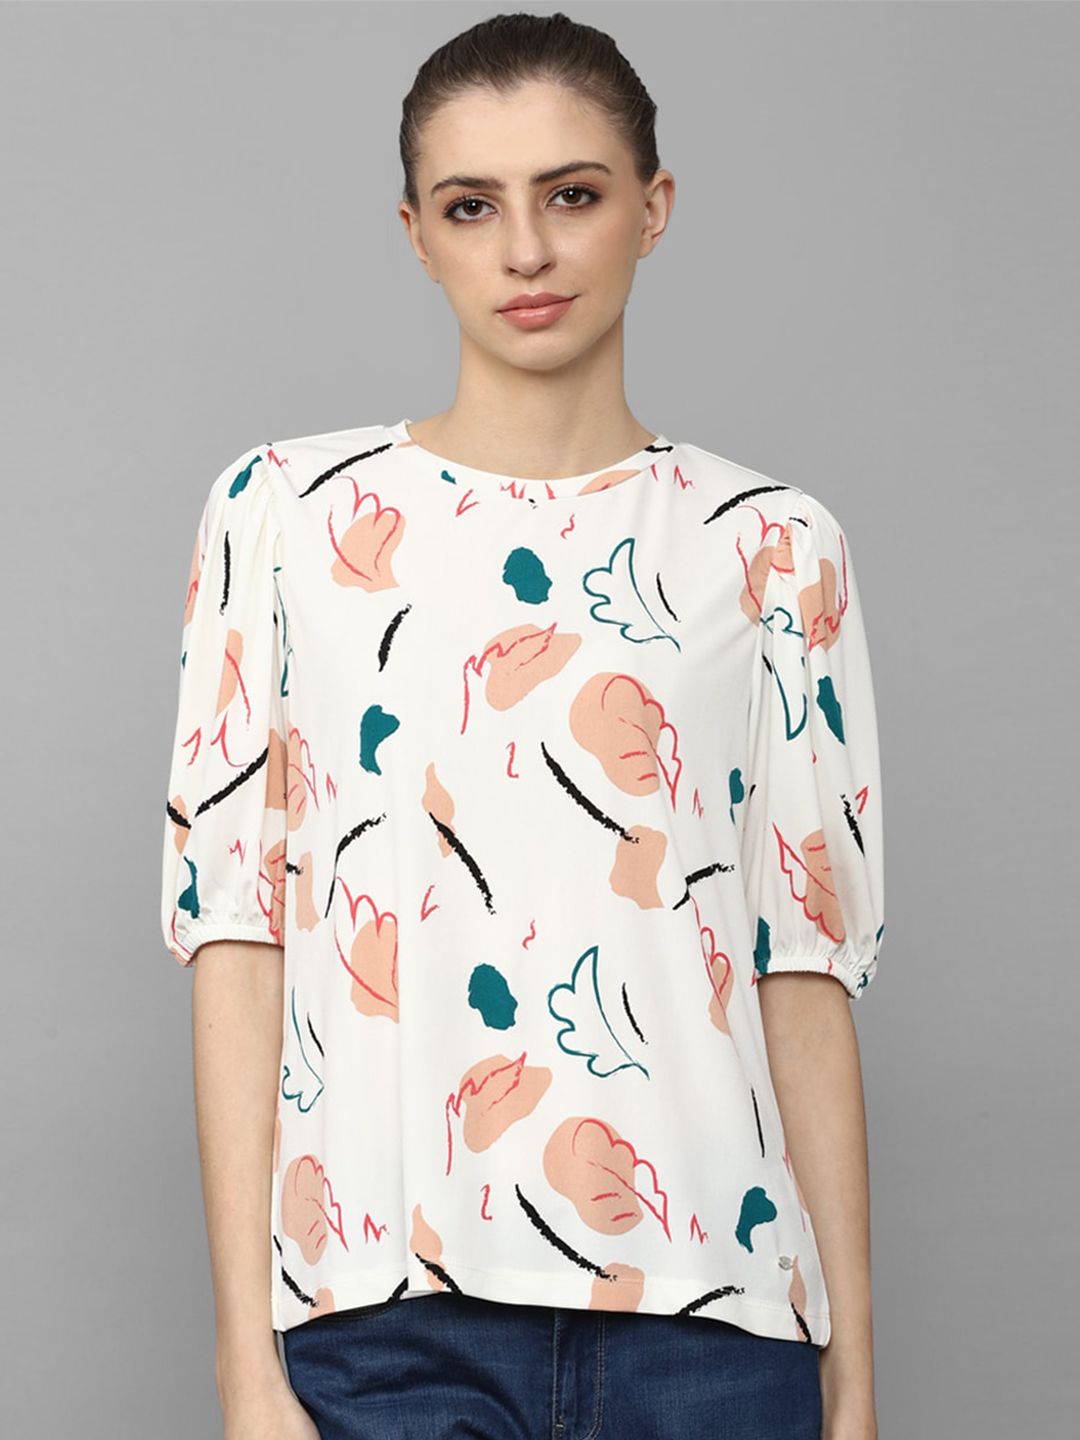 Allen Solly Tropical Print Tropical Top Price in India